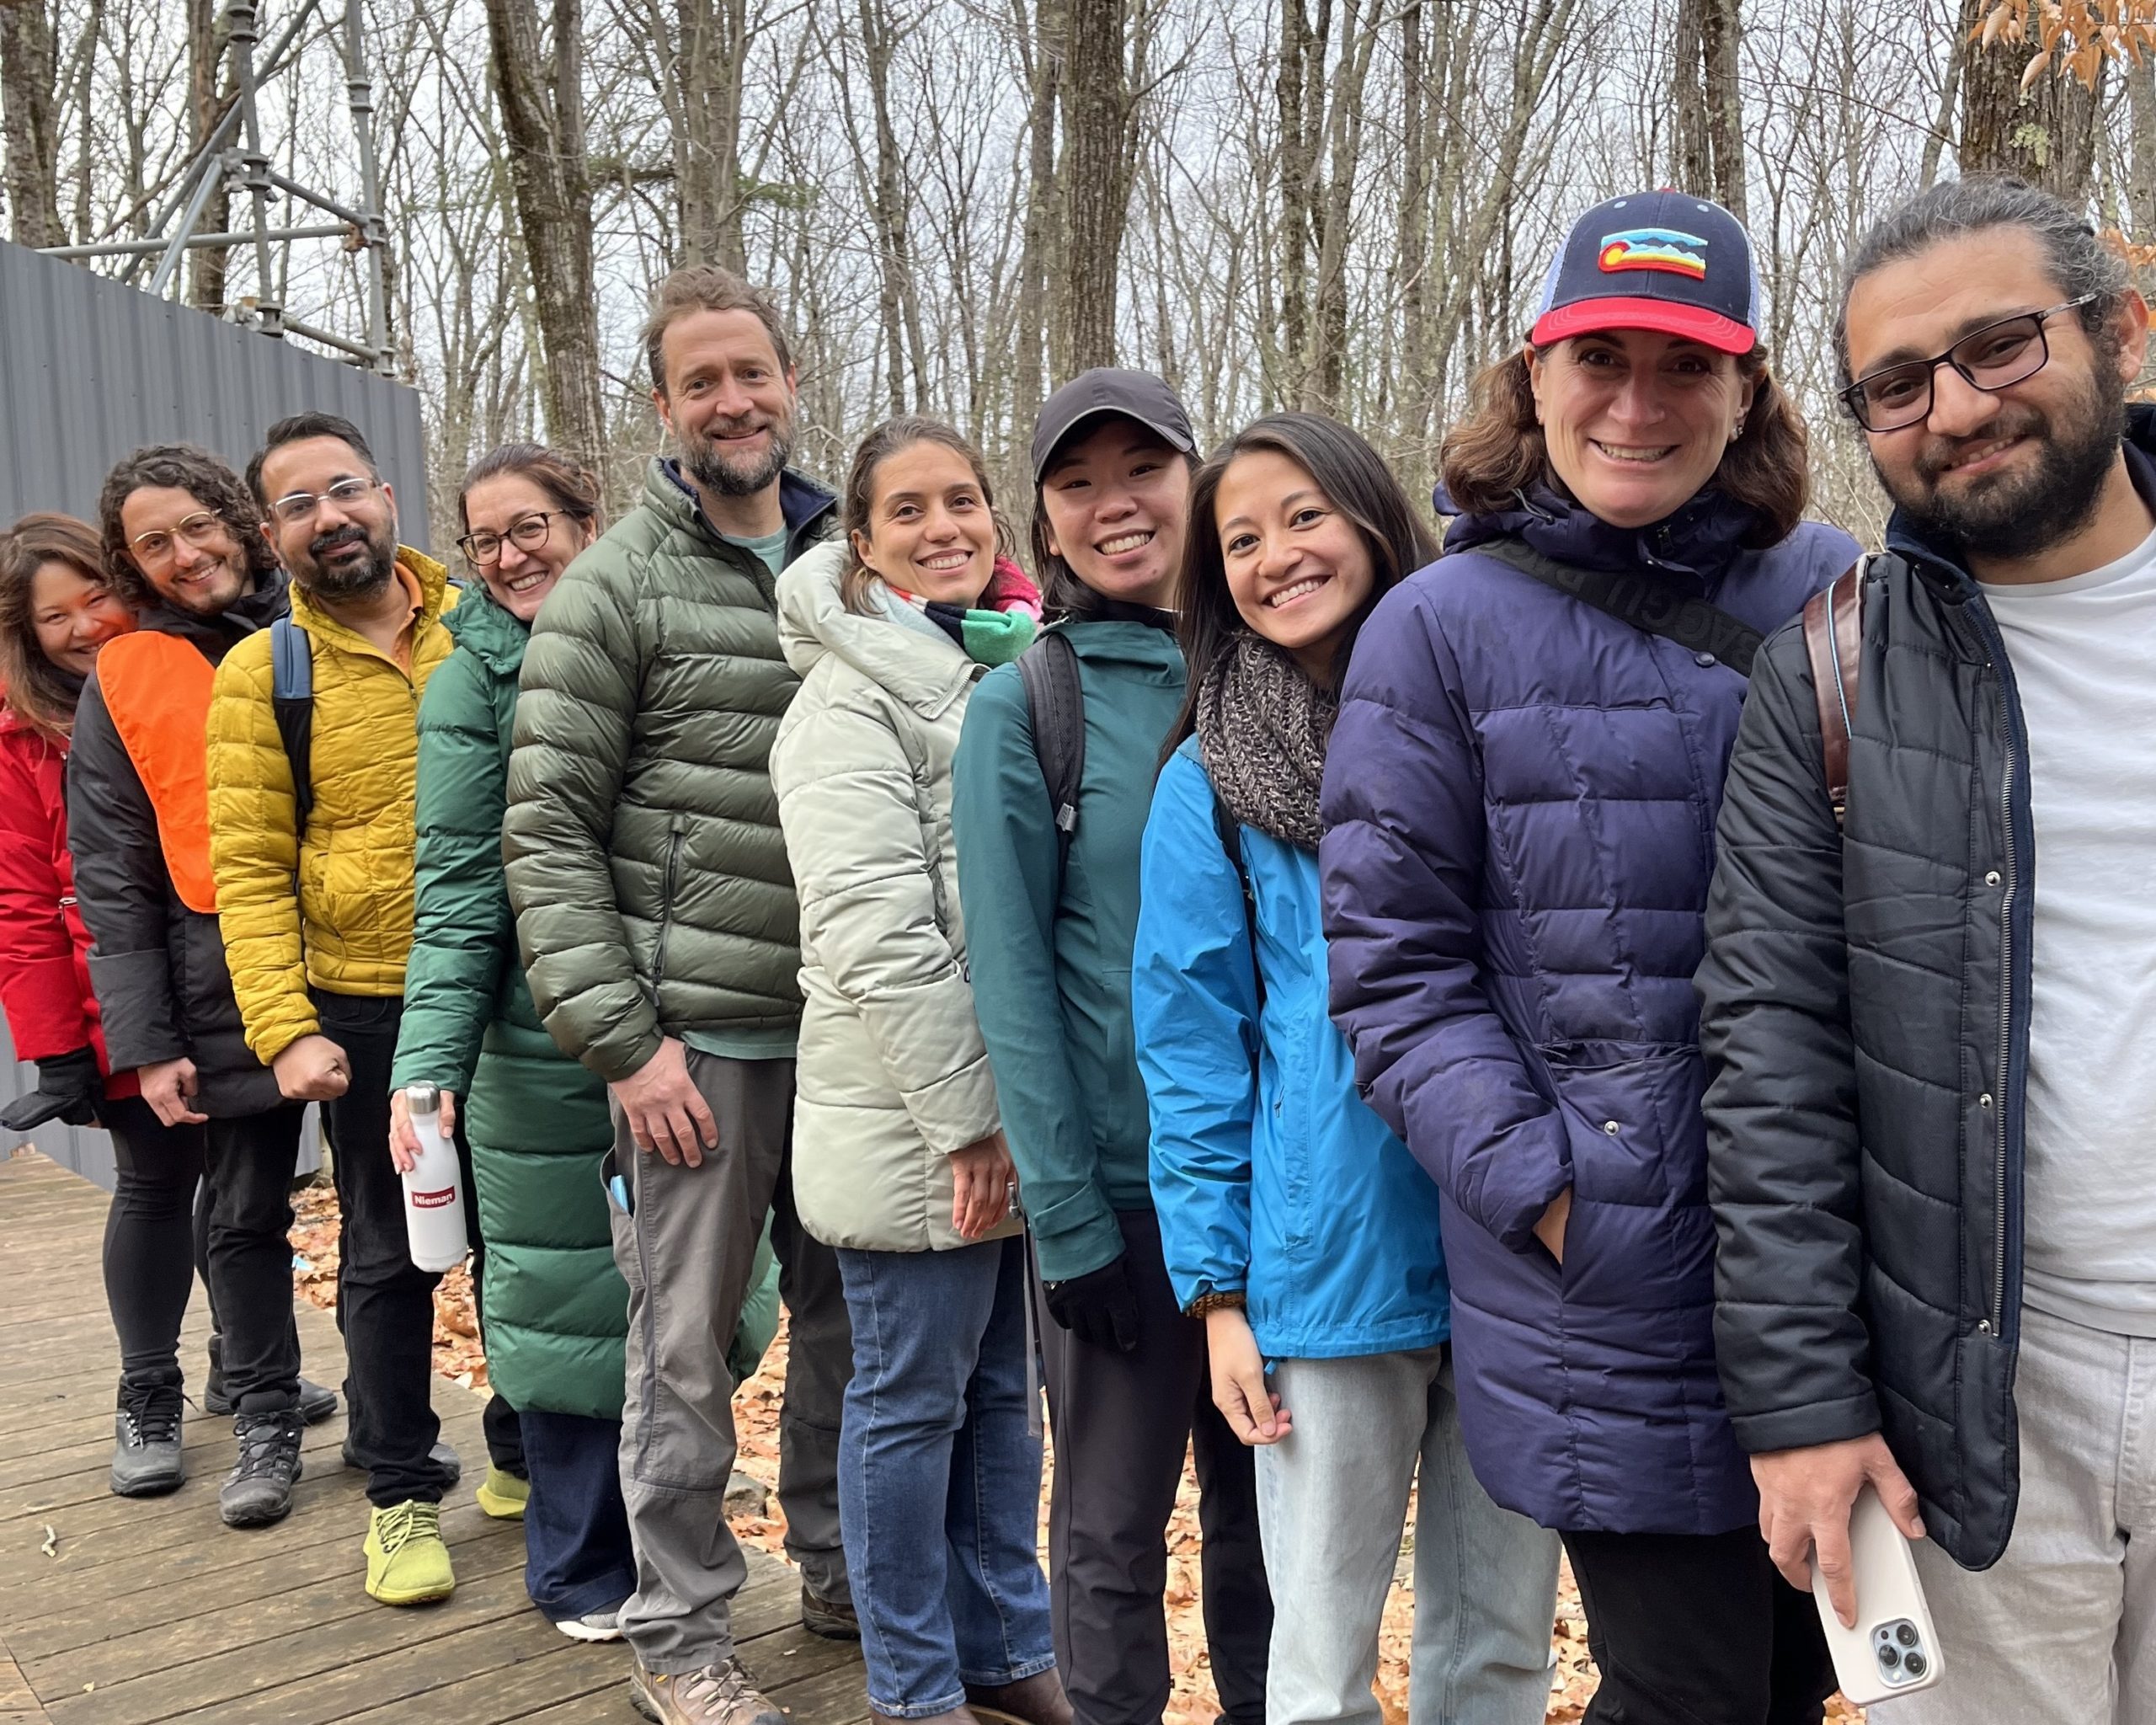 Nieman Fellows and affiliates visit the Harvard Forest in Petersham, Mass., on Dec. 6, 2022